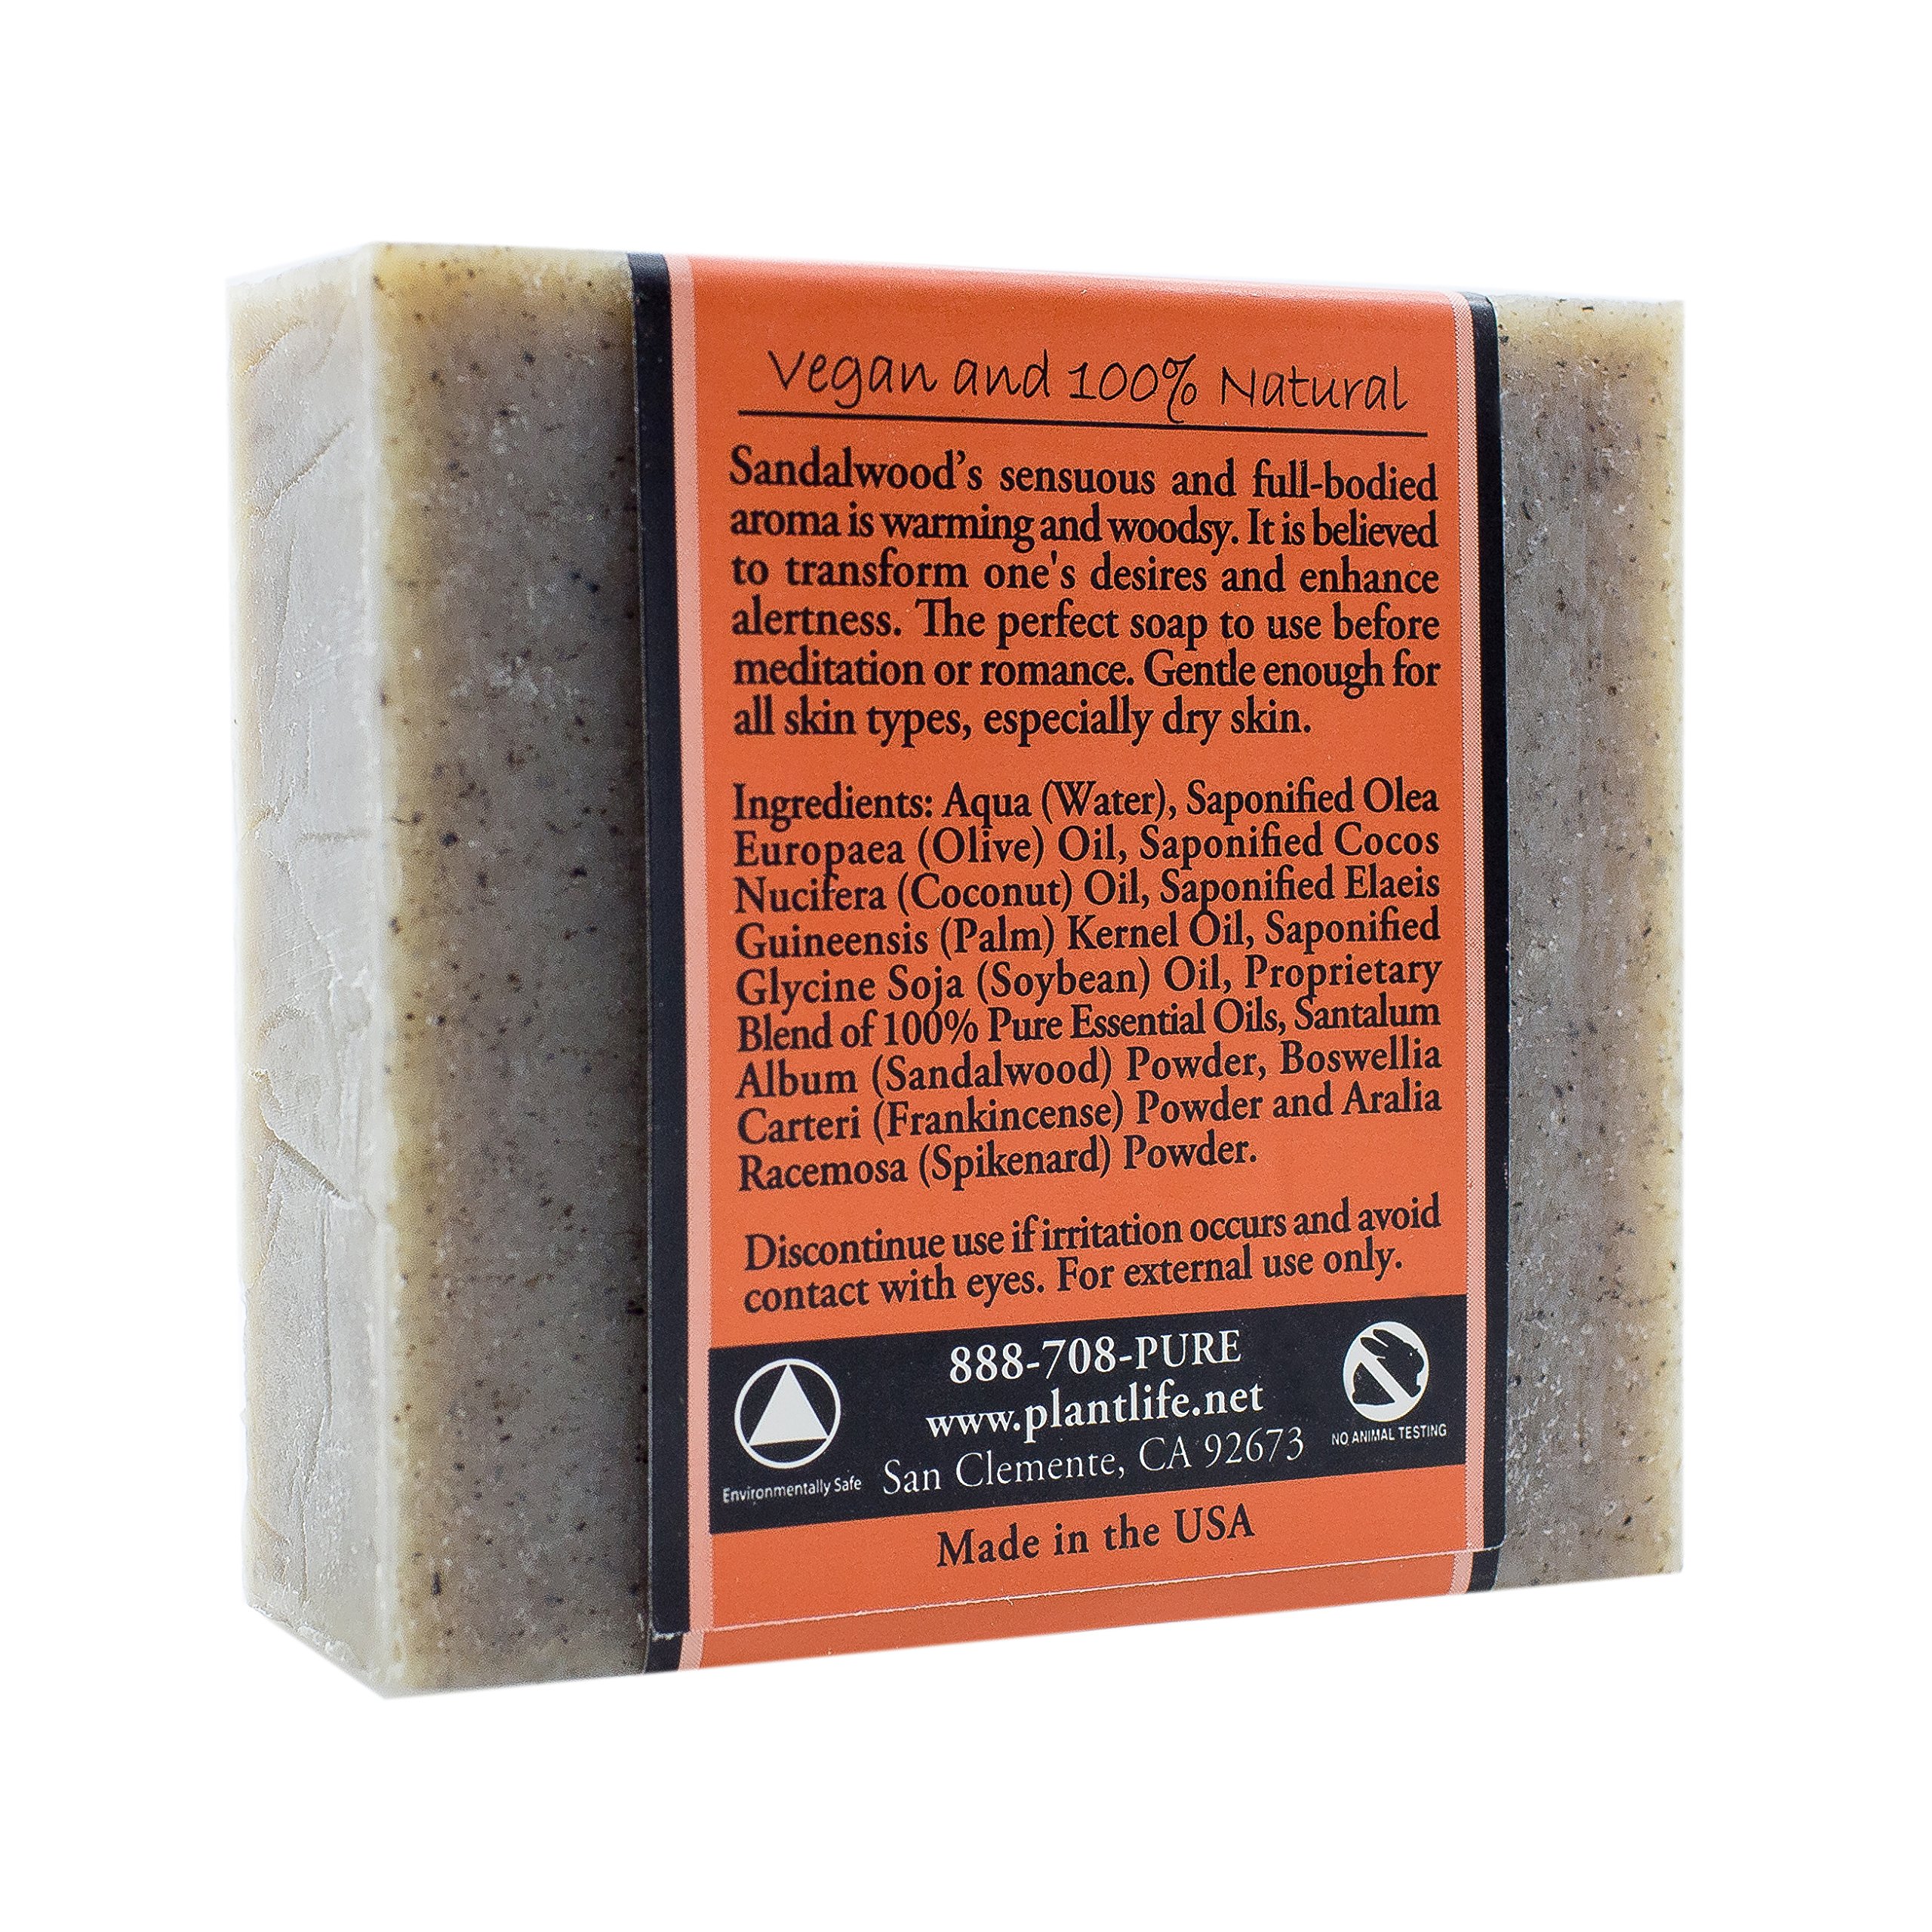 Plantlife Sandalwood Bar Soap - Moisturizing and Soothing Soap for Your Skin - Hand Crafted Using Plant-Based Ingredients - Made in California 4oz Bar